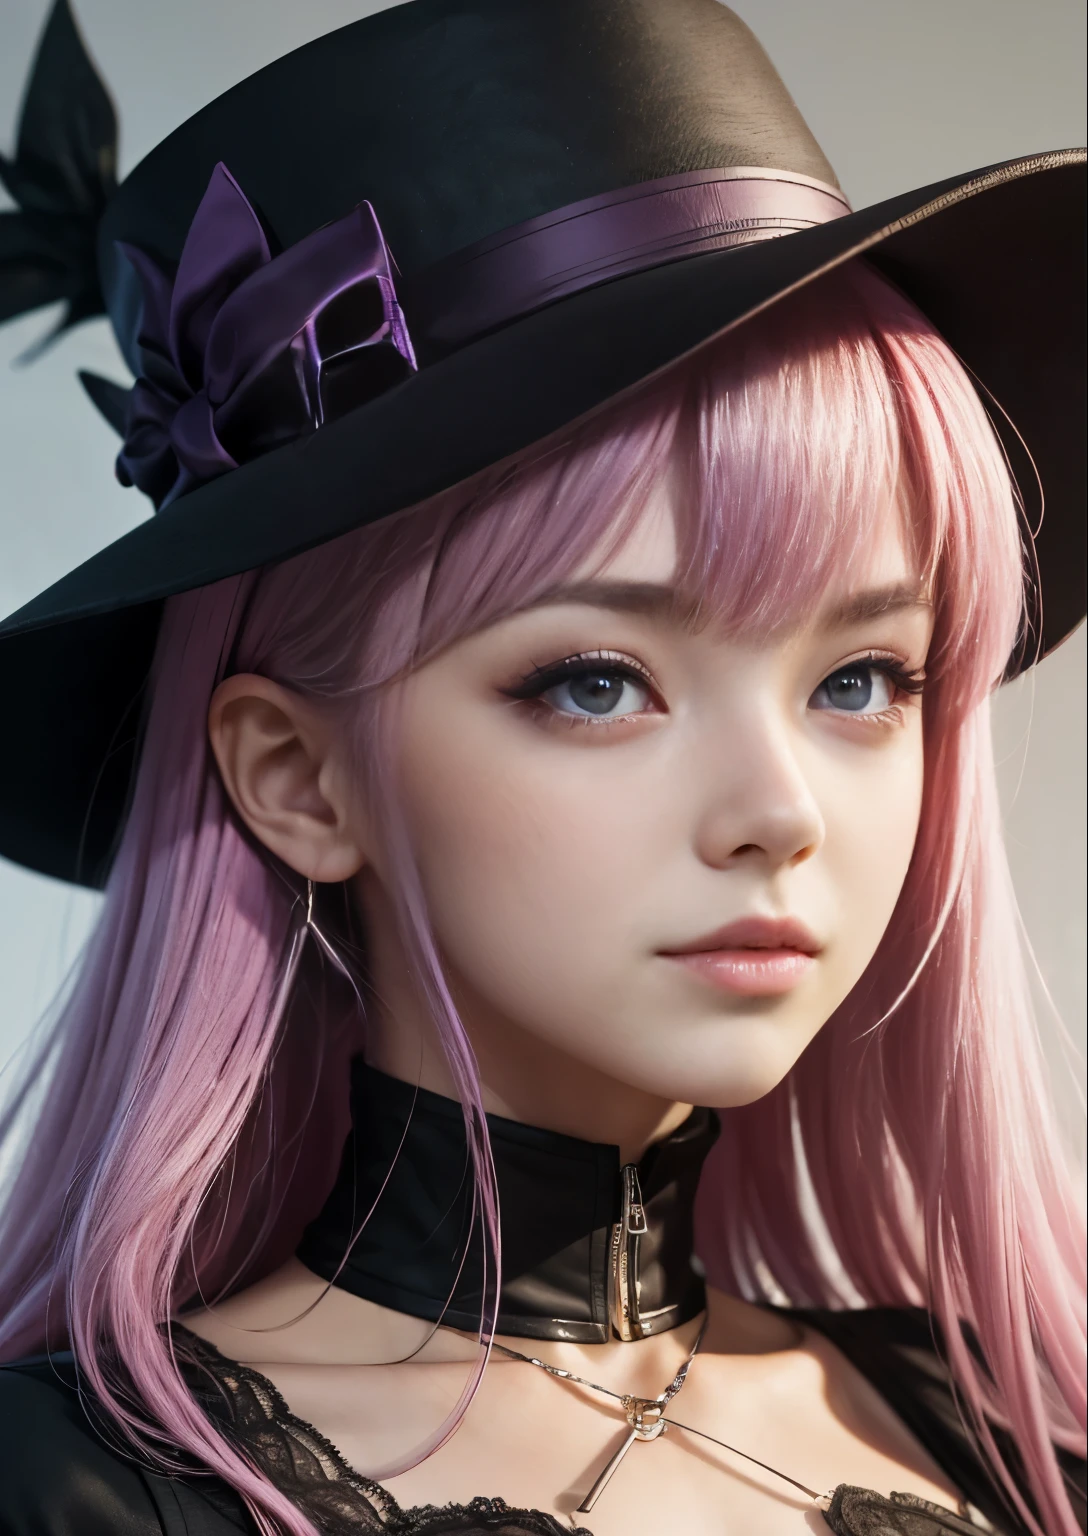 1 girl with pink hair and black hat with purple eyes, character close up, character close-up, rendered in sfm, close up character, 4 k octan render, persona 5 art style wlop, render of a cute girl, character art closeup, close up of a young  girl, shalltear from overlord